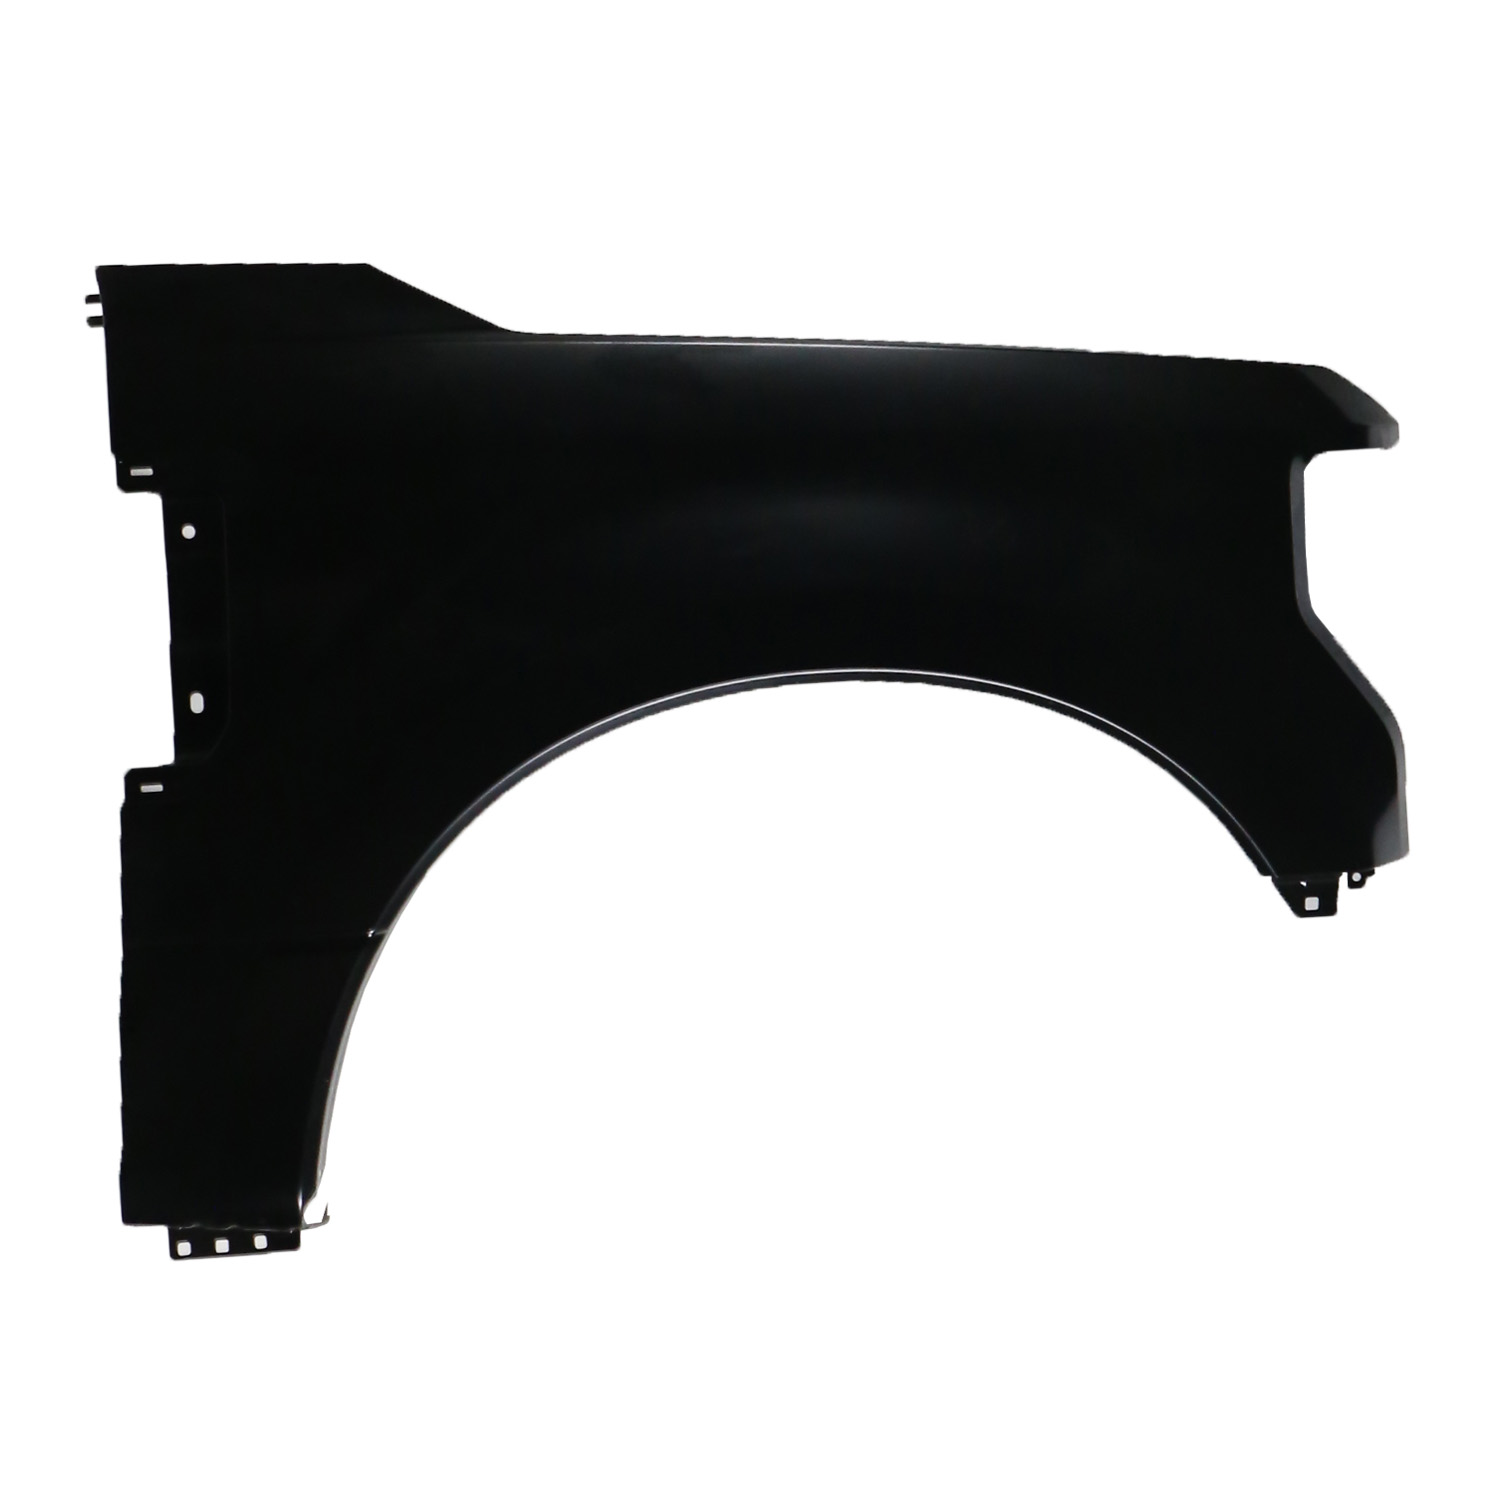 Aftermarket FENDERS for FORD - F-350 SUPER DUTY, F-350 SUPER DUTY,17-19,RT Front fender assy